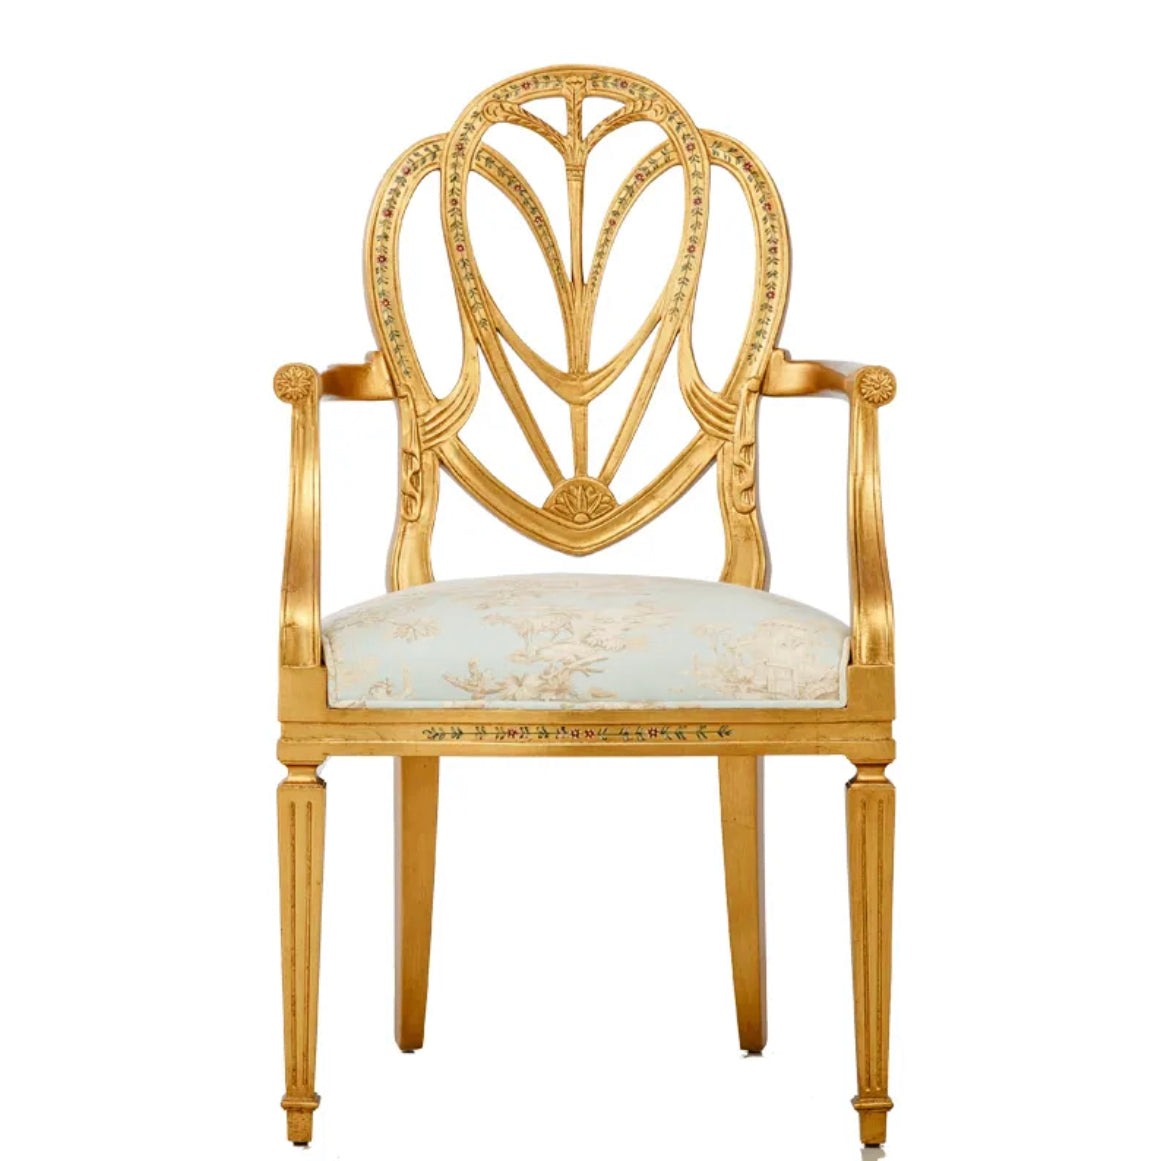  Dinning Chair Hollow Out Back Comfortable Brass Baroque Design Dining Room Chairs